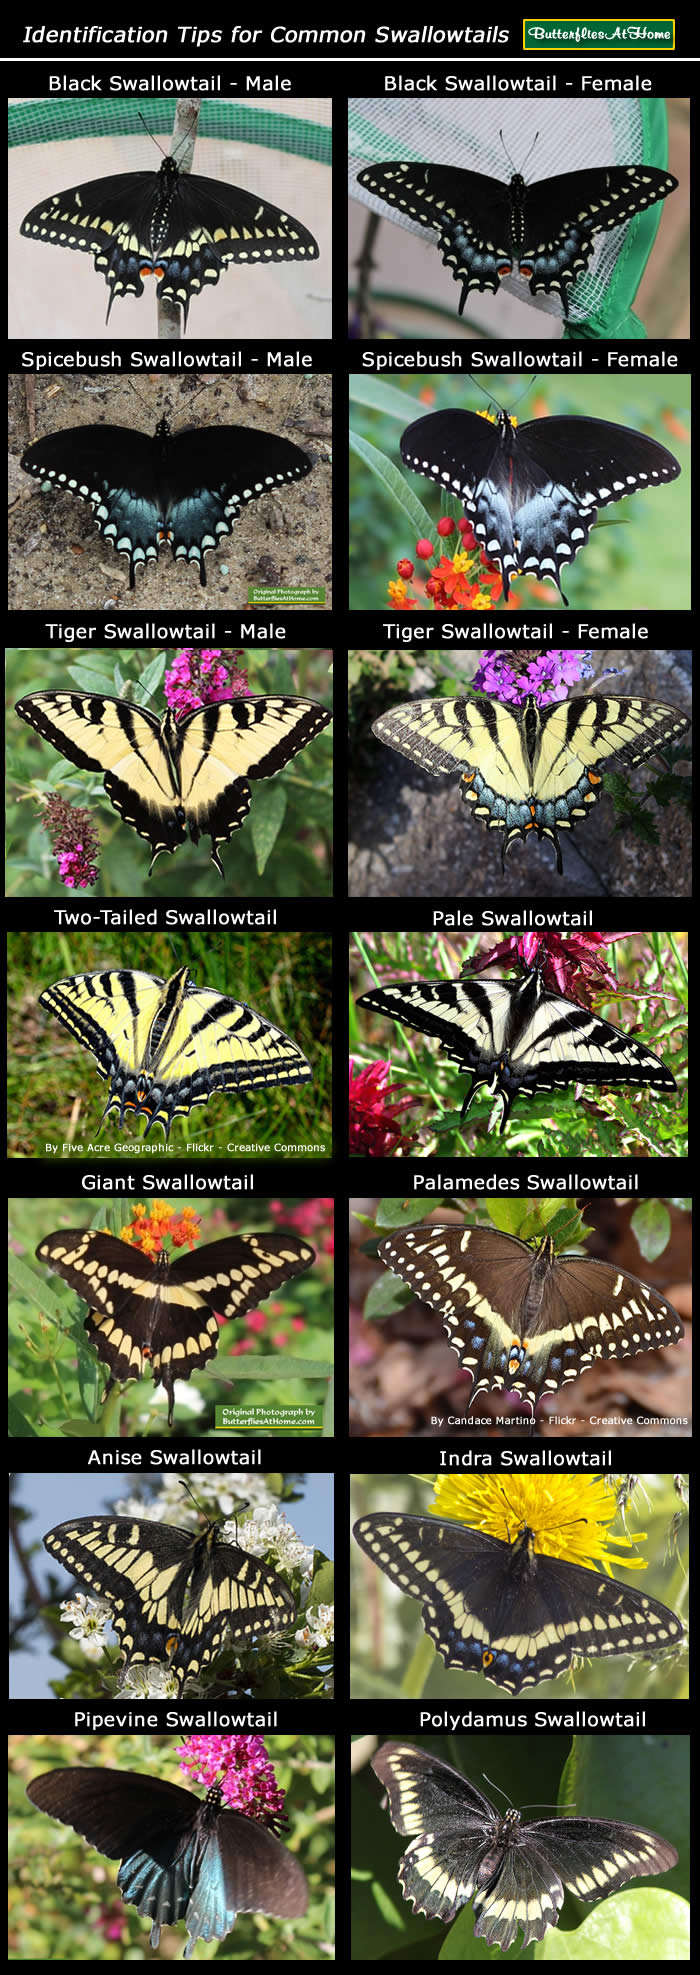 click for identification tips for swallowtail butterflies